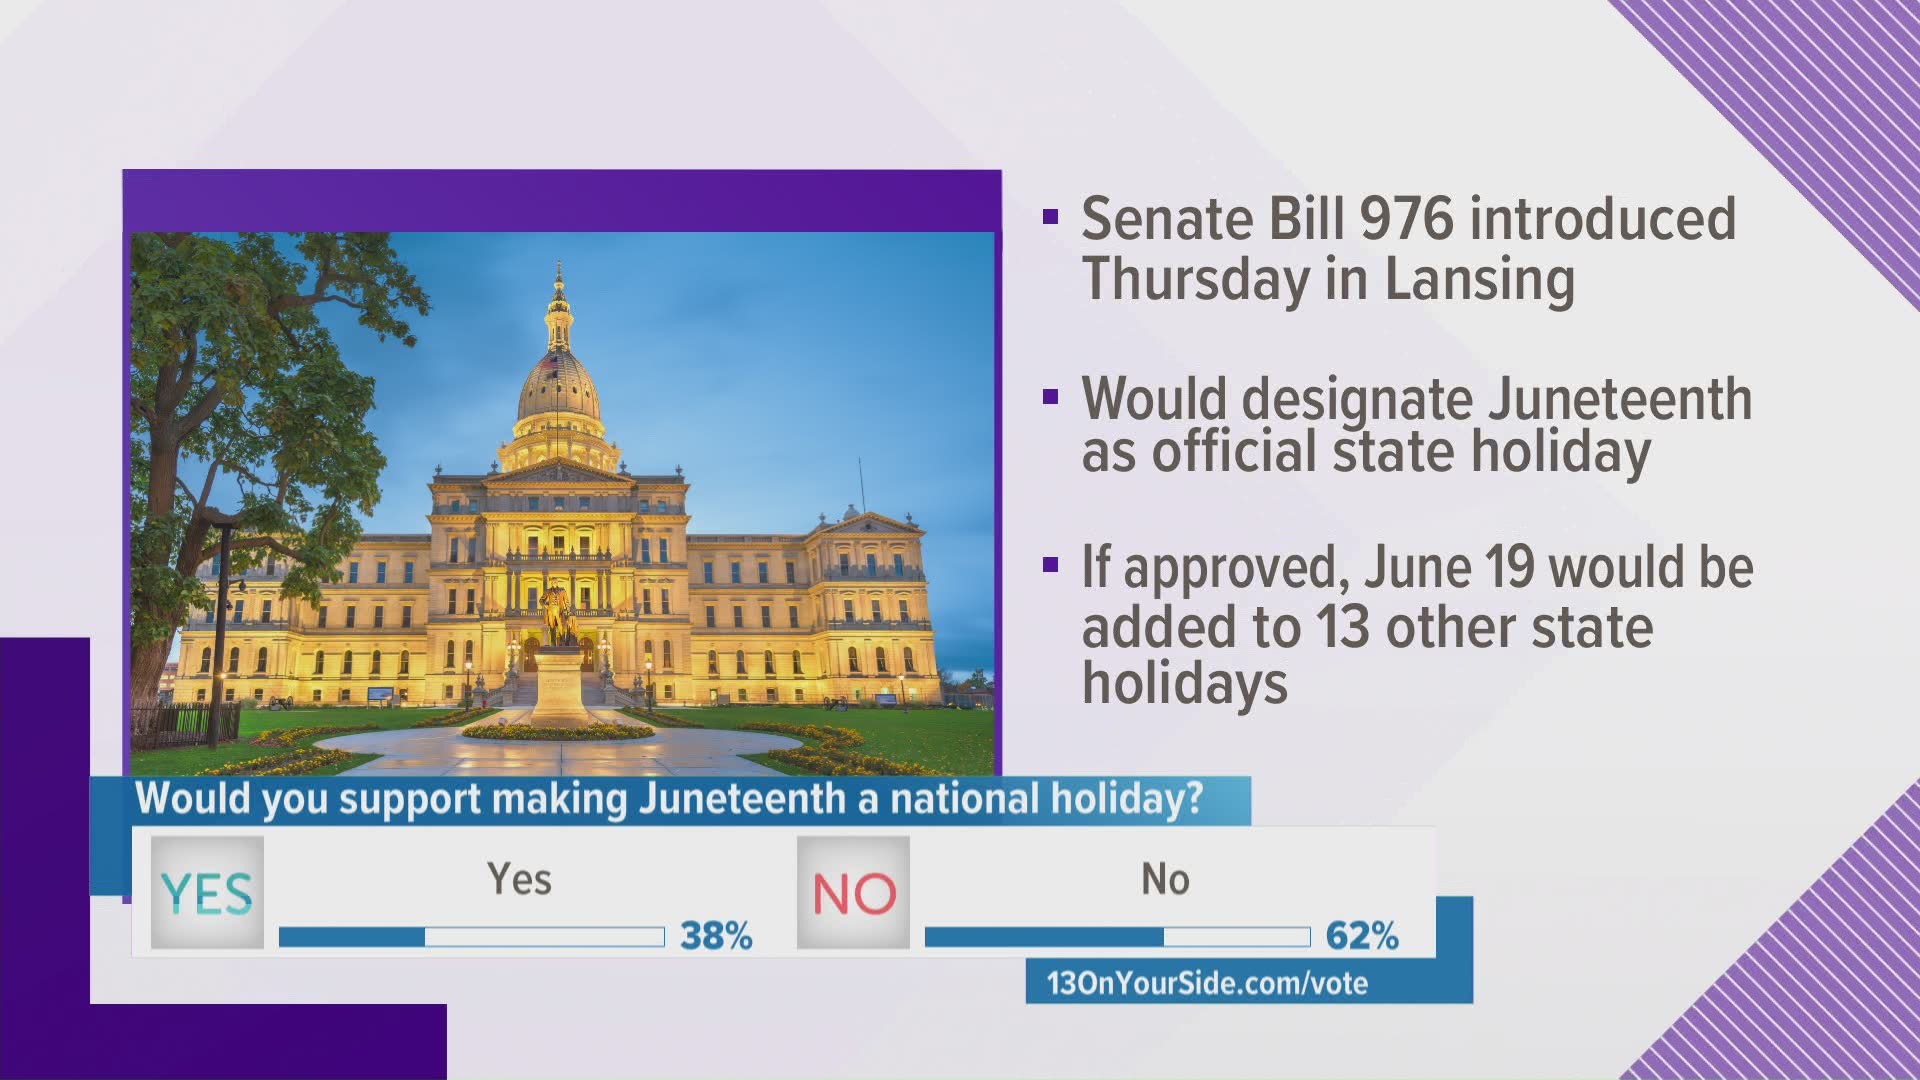 A Senate bill has been introduced that would designate June 19 as an official state holiday in recognition of Juneteenth, commemorating the end of slavery.